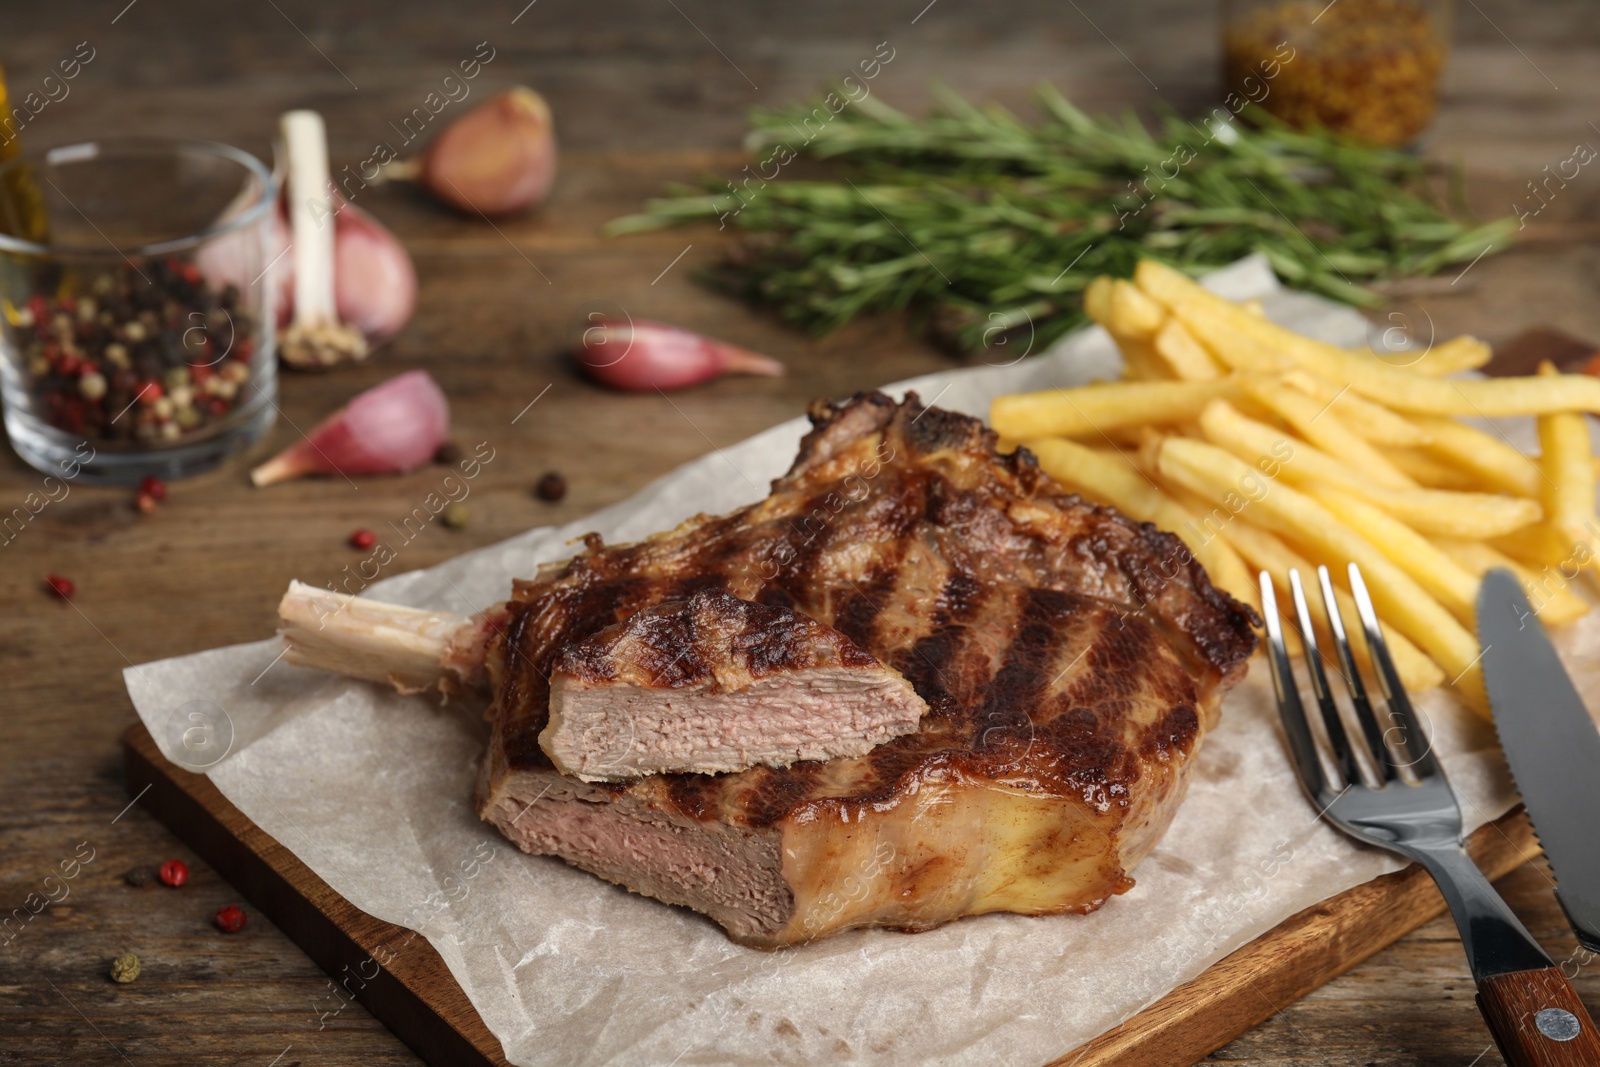 Photo of Tasty grilled beef steak and French fries on wooden table